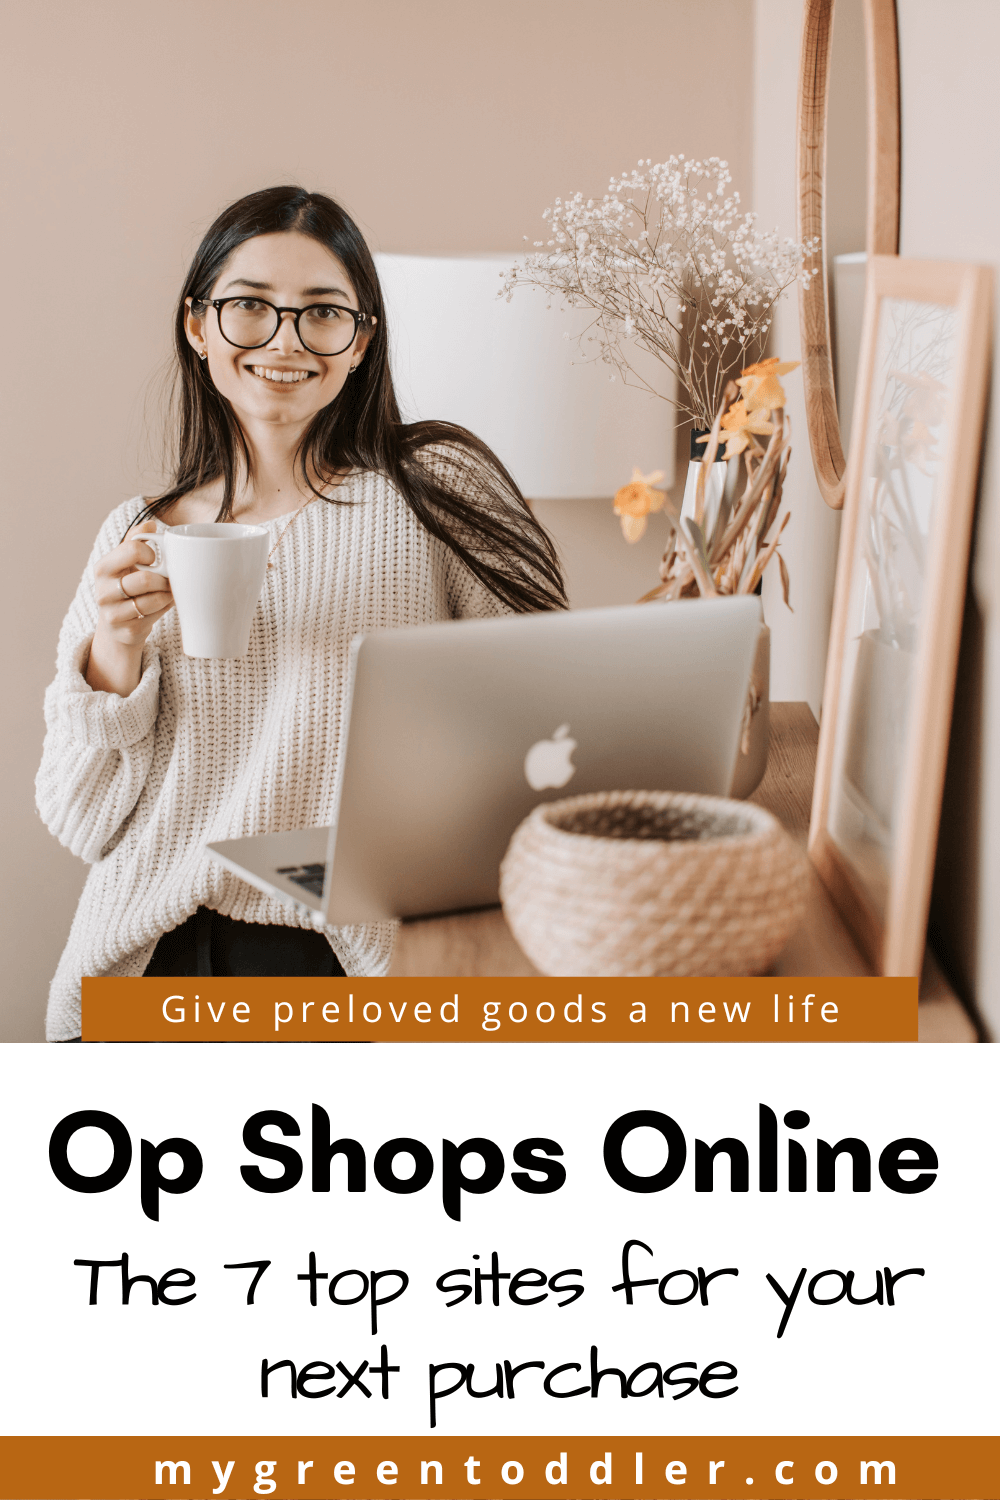 Online op shop Australia pin. Woman sitting in front of laptop holding a mug, smiling at the camera.